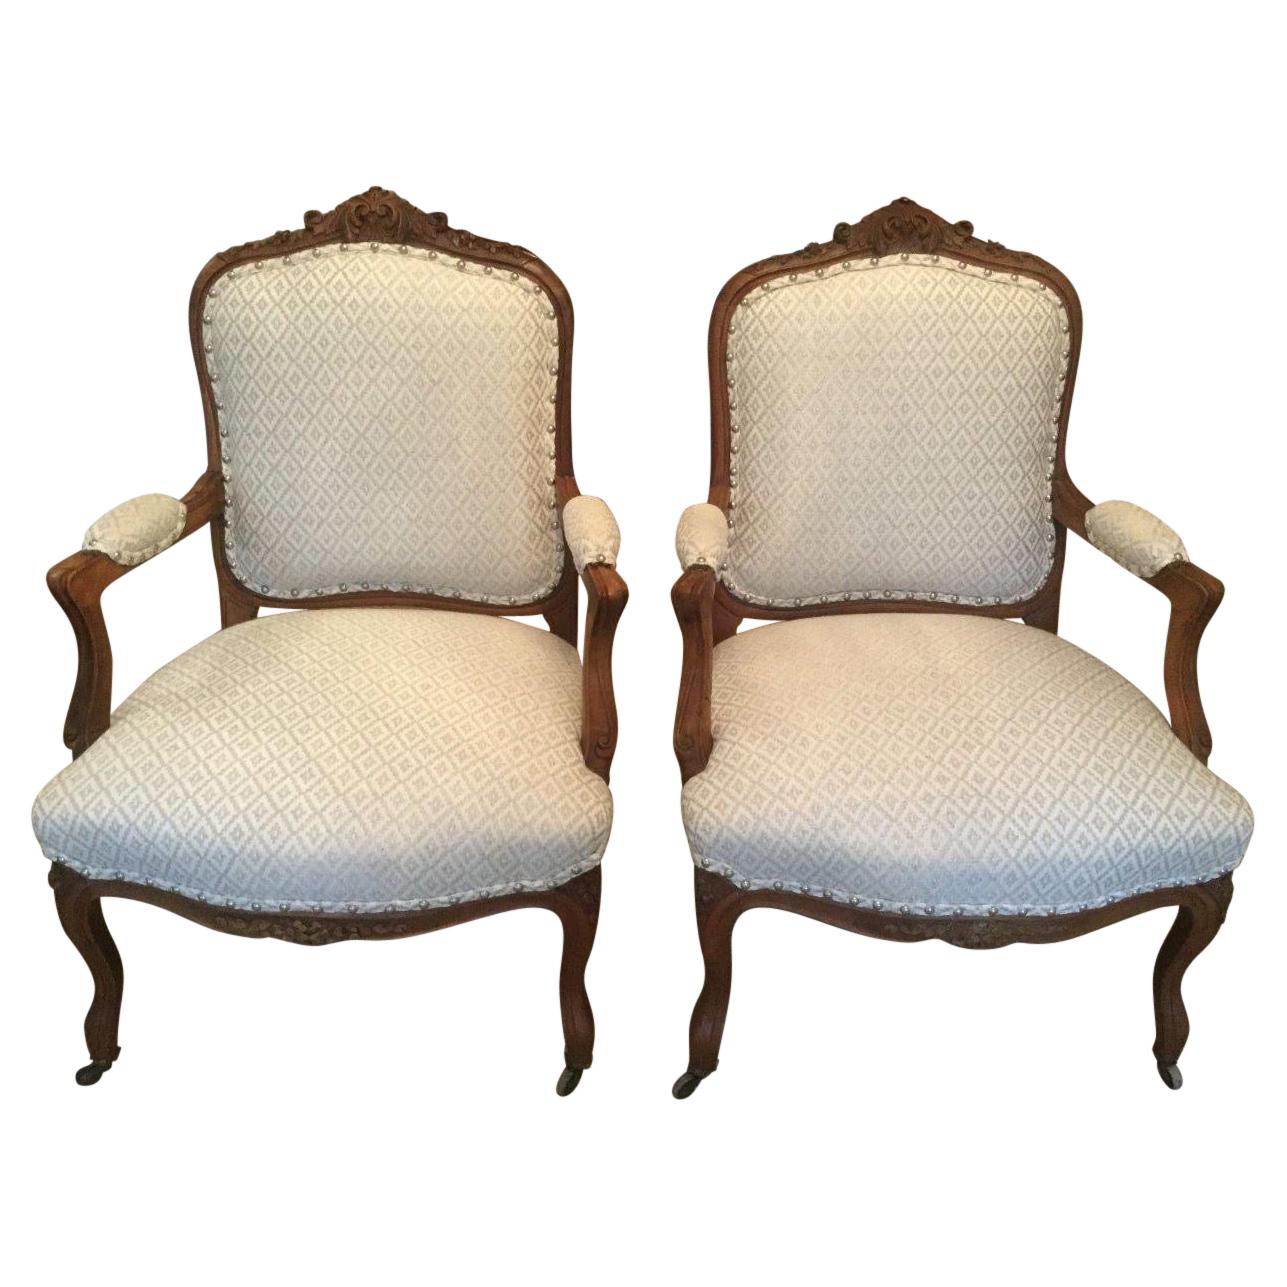 Pair of Regal 19th Century French Louis XV Style Armchairs